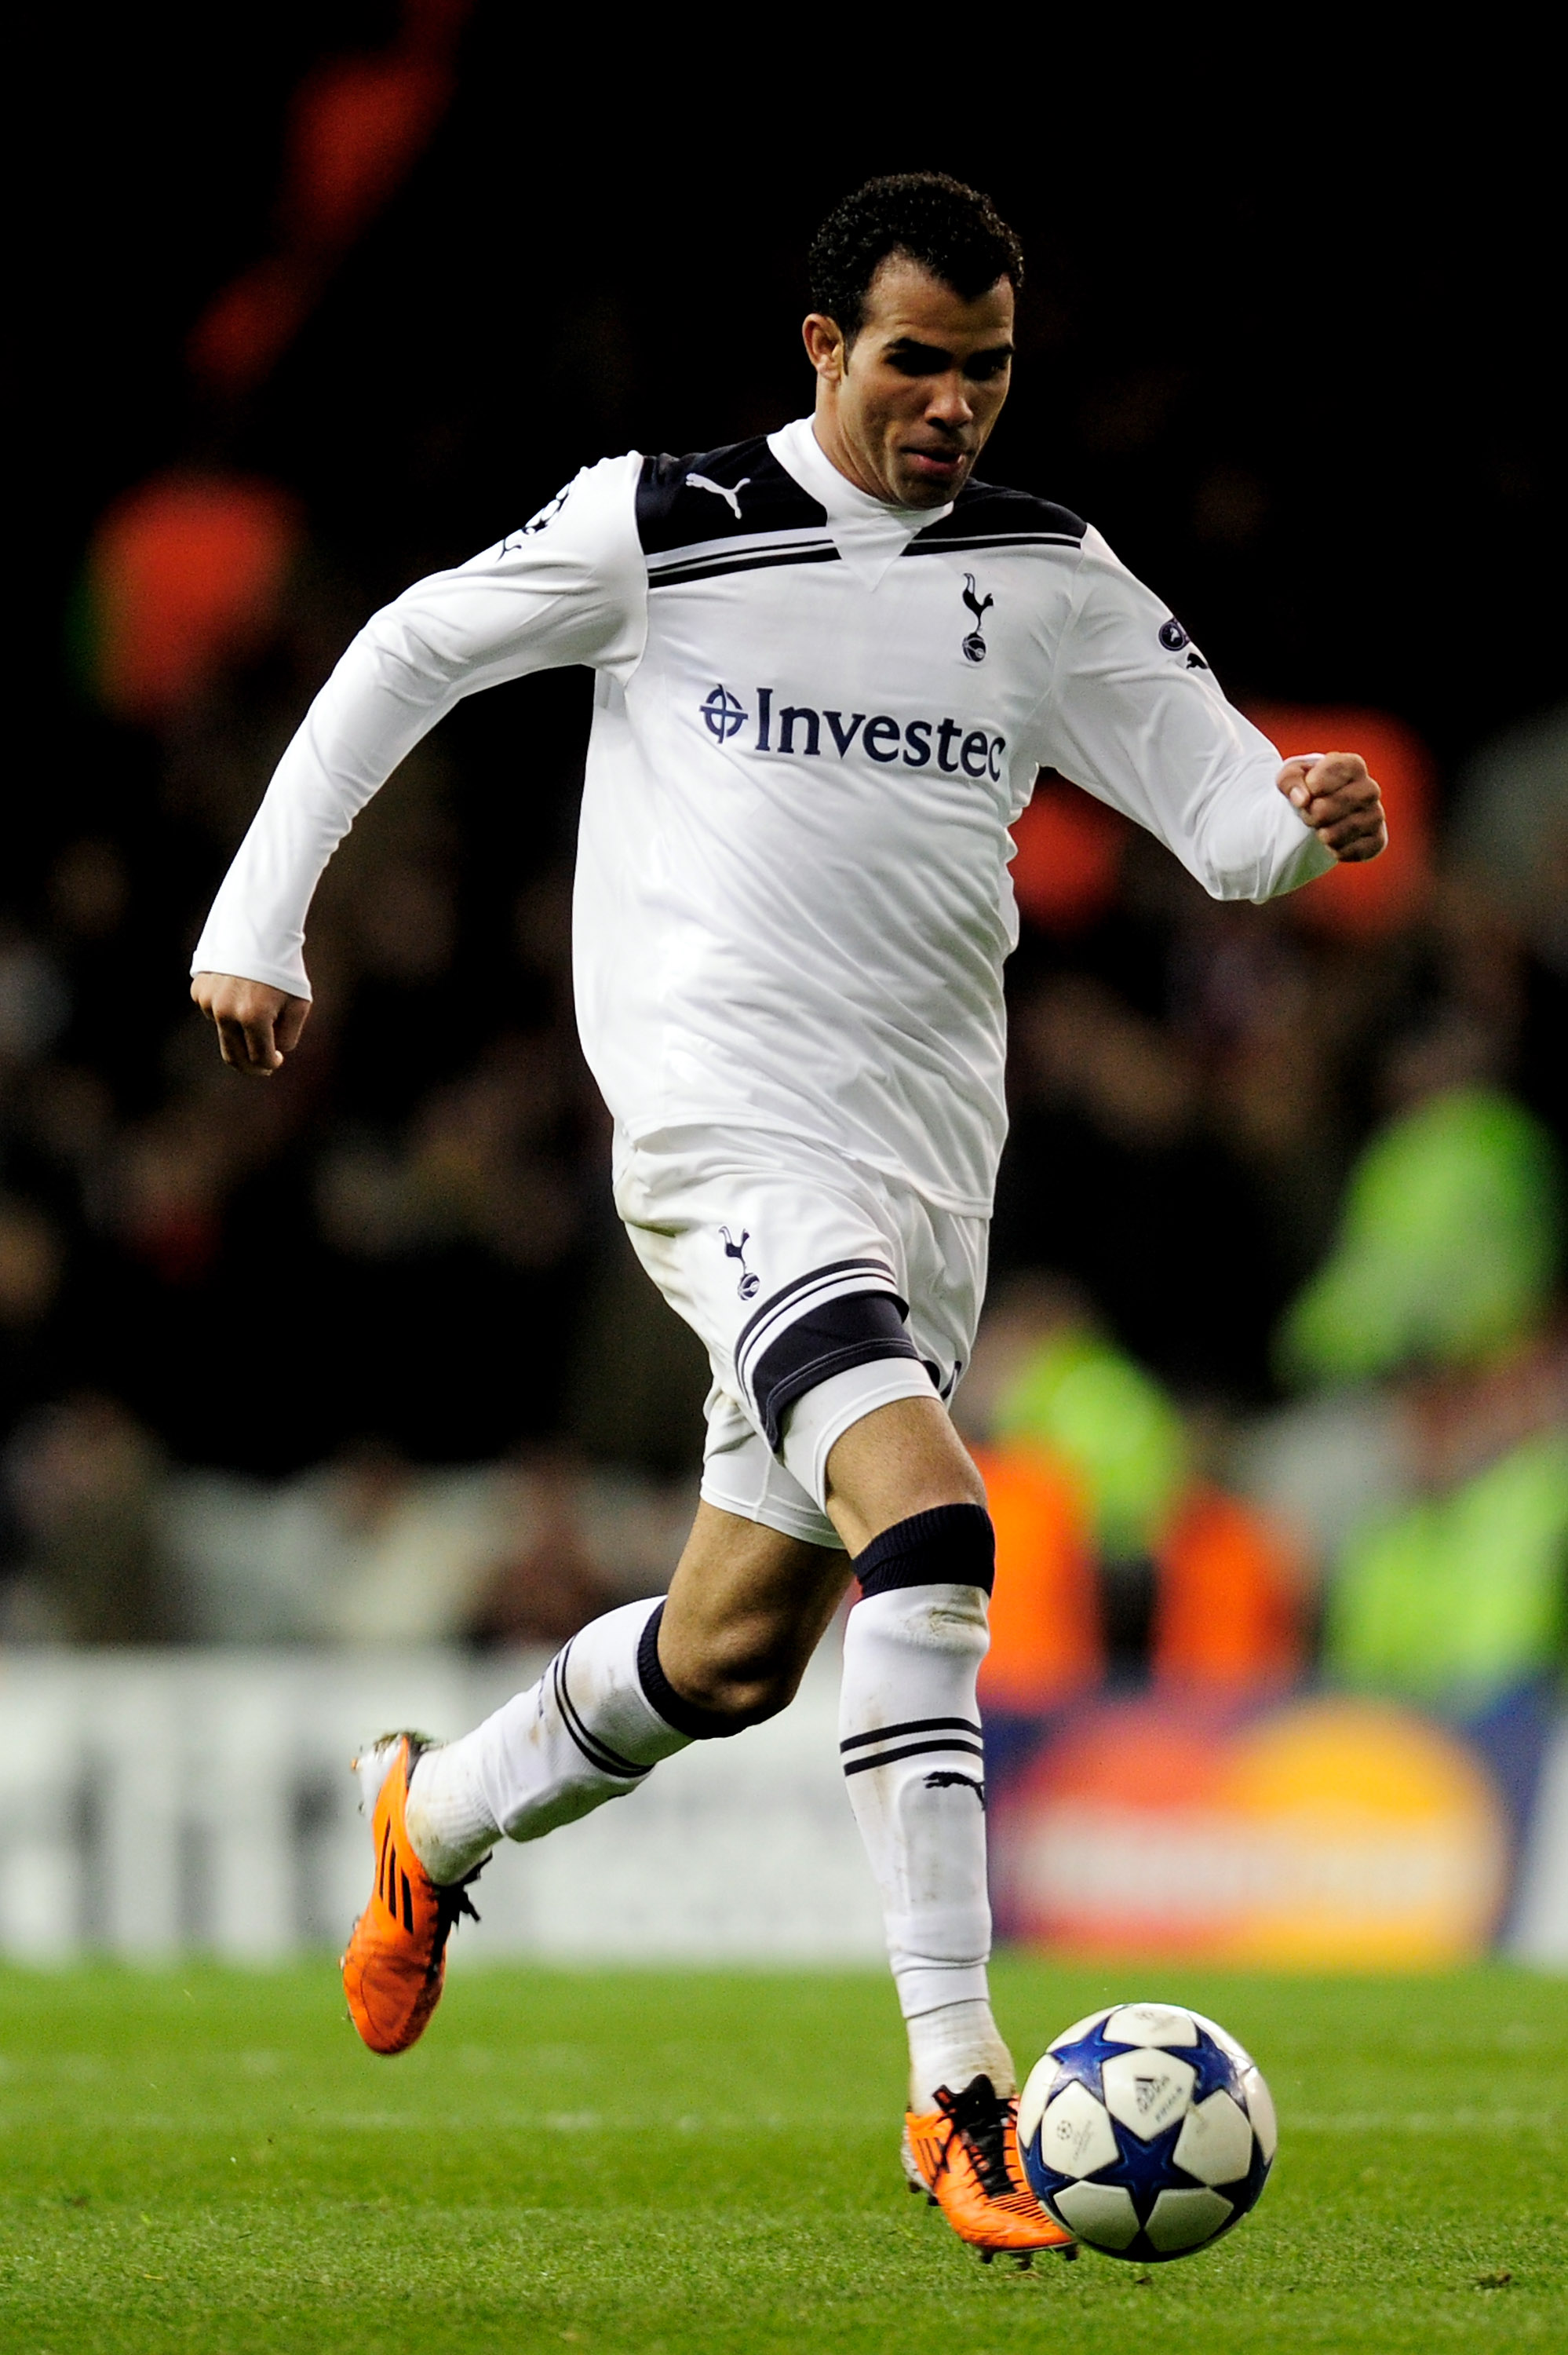 LONDON, ENGLAND - MARCH 09:  Sandro of Tottenham in action during the UEFA Champions League round of 16 second leg match between Tottenham Hotspur and AC Milan at White Hart Lane on March 9, 2011 in London, England.  (Photo by Jamie McDonald/Getty Images)